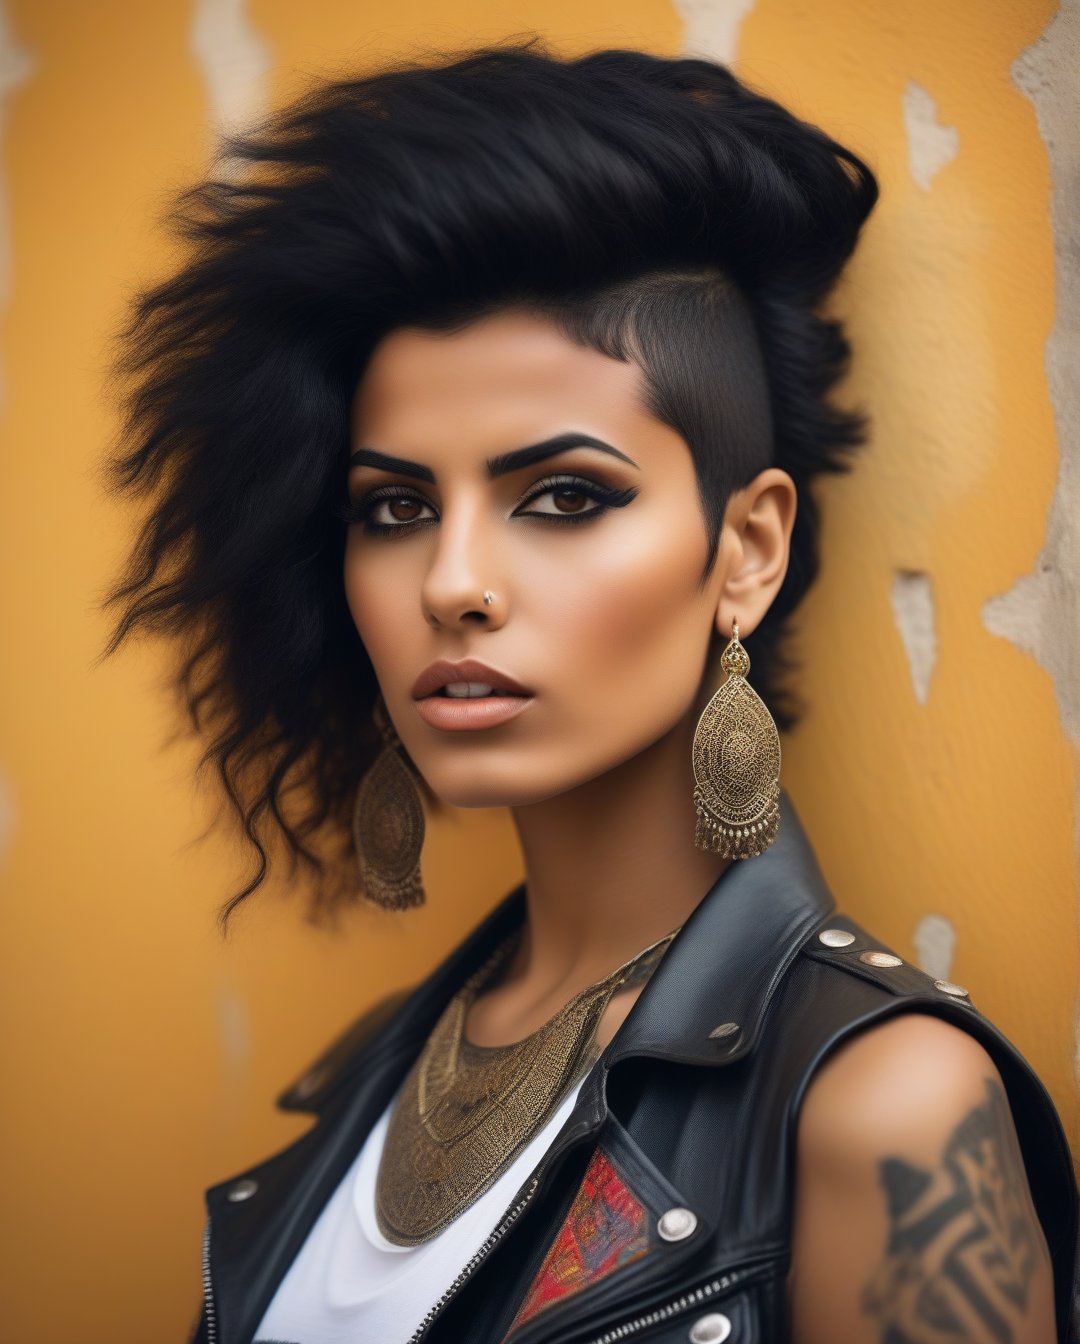 A rebellious Saudi Arabian woman, her black hair styled into a punk rock inspired look, complements her brown eyes and light brown tan skin. The image, possibly a vibrant painting or a striking photograph, captures her bold and unique style with precision. Every detail, from her edgy clothing to her unconventional appearance, exudes an air of confidence and individuality. The high quality of the image allows viewers to truly appreciate the essence of her unconventional beauty and self-expression.